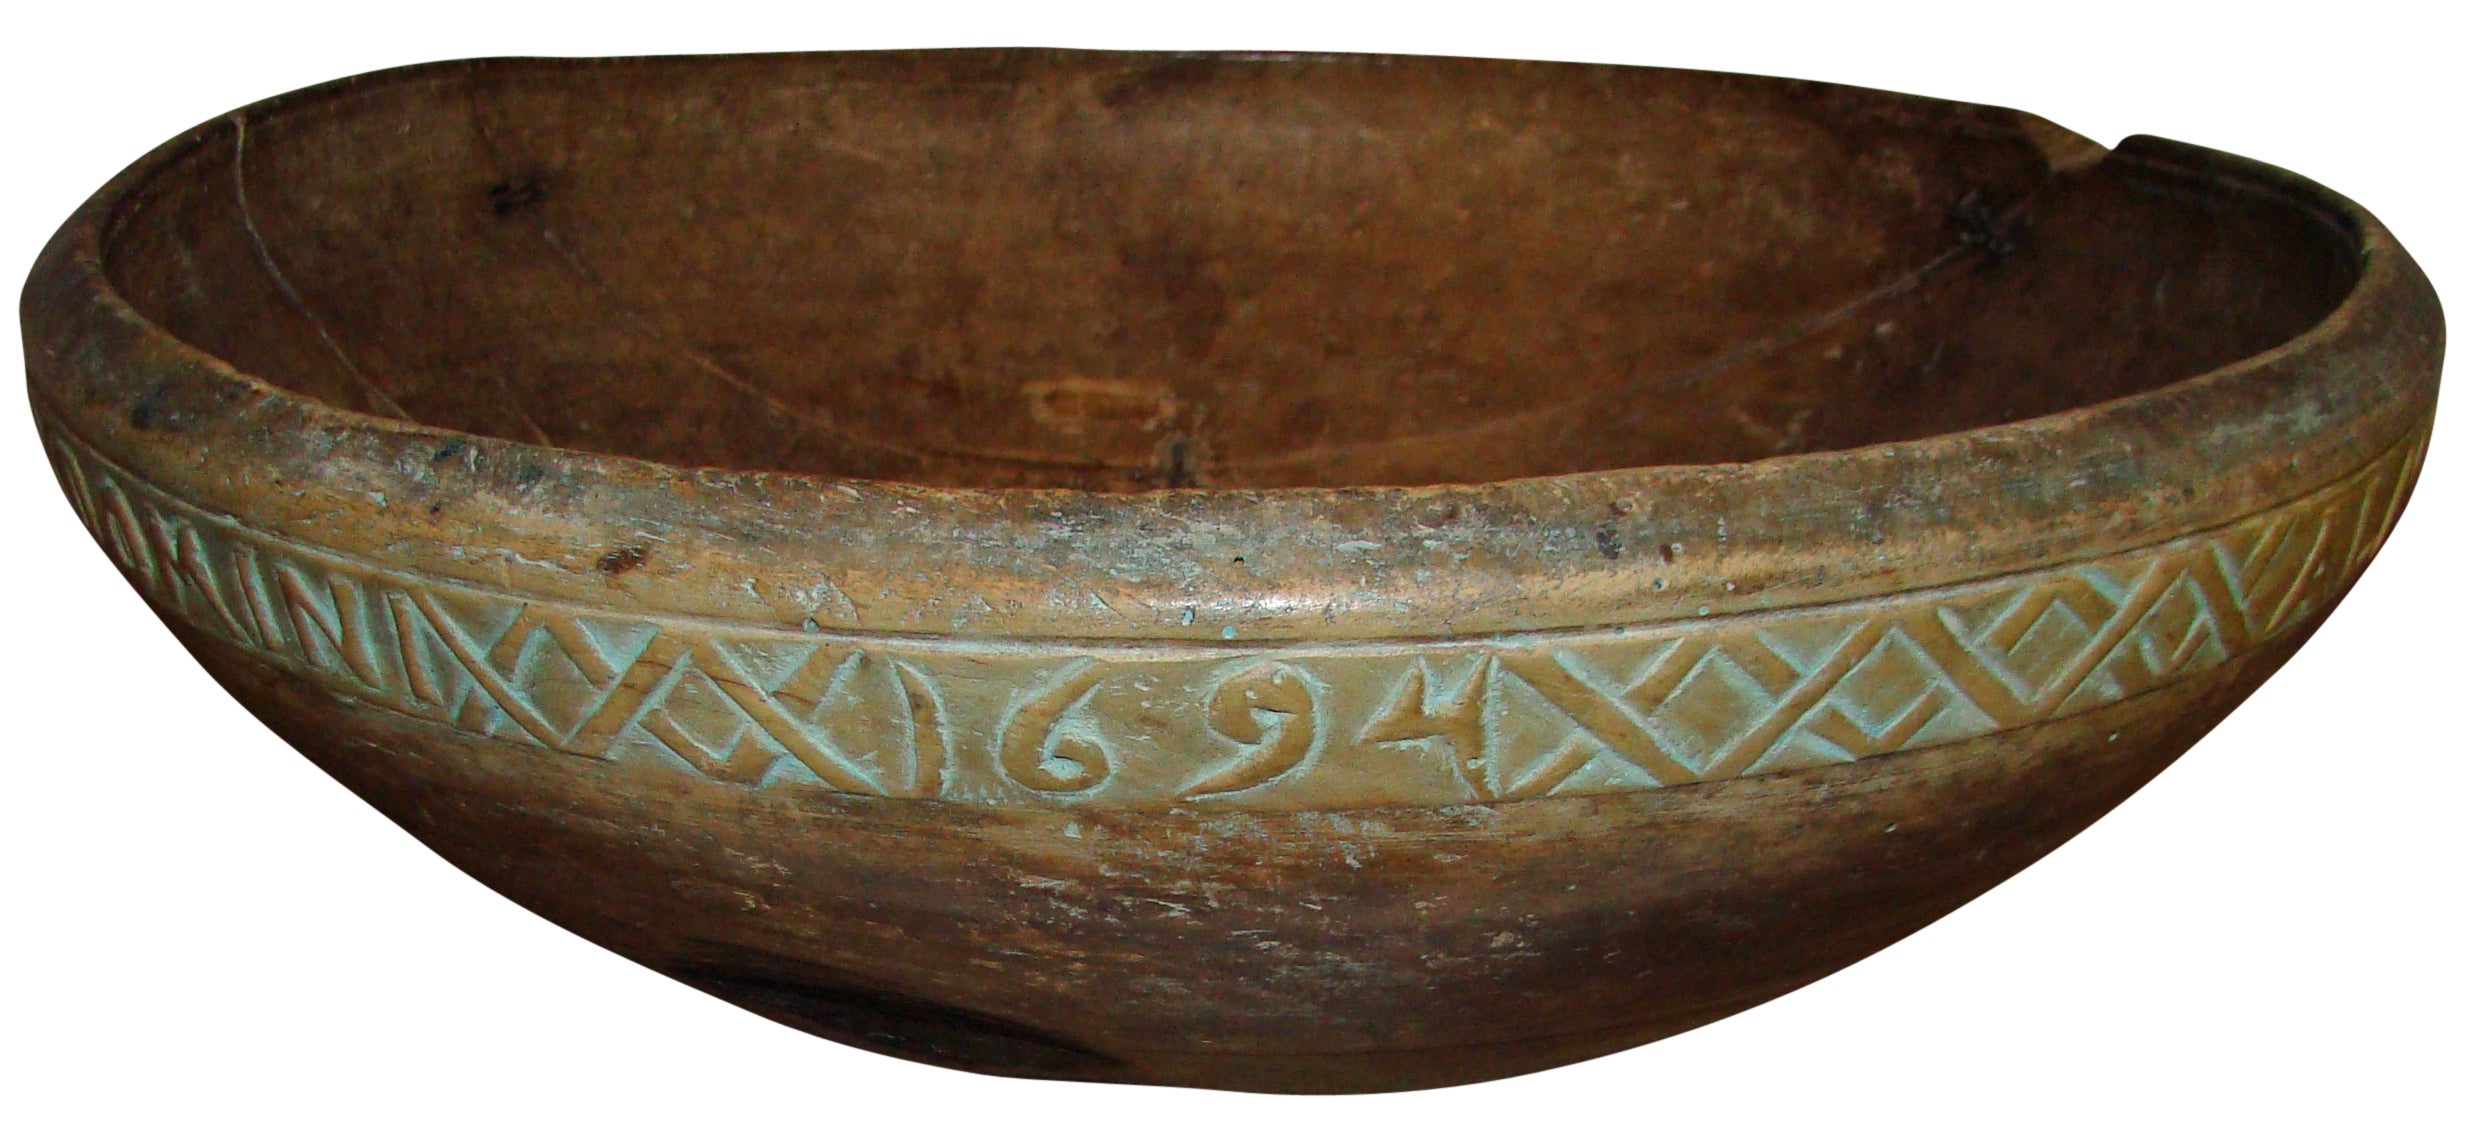 Large wooden bowl, dated 1694 and inscribed with two names. Probably for celebrating marriage between 